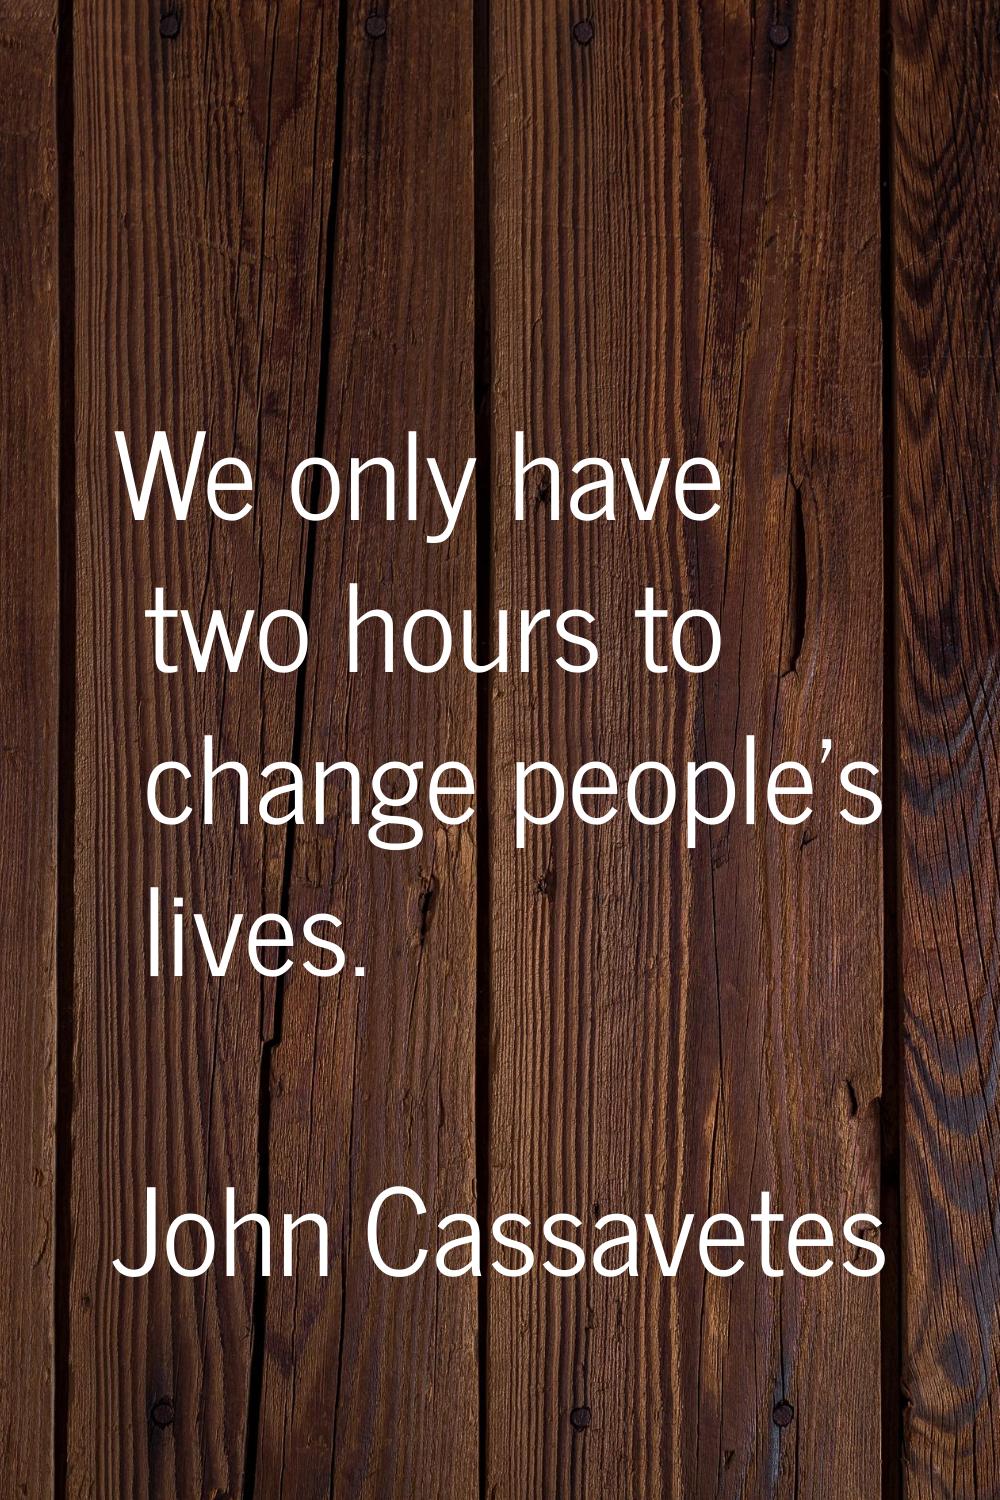 We only have two hours to change people's lives.